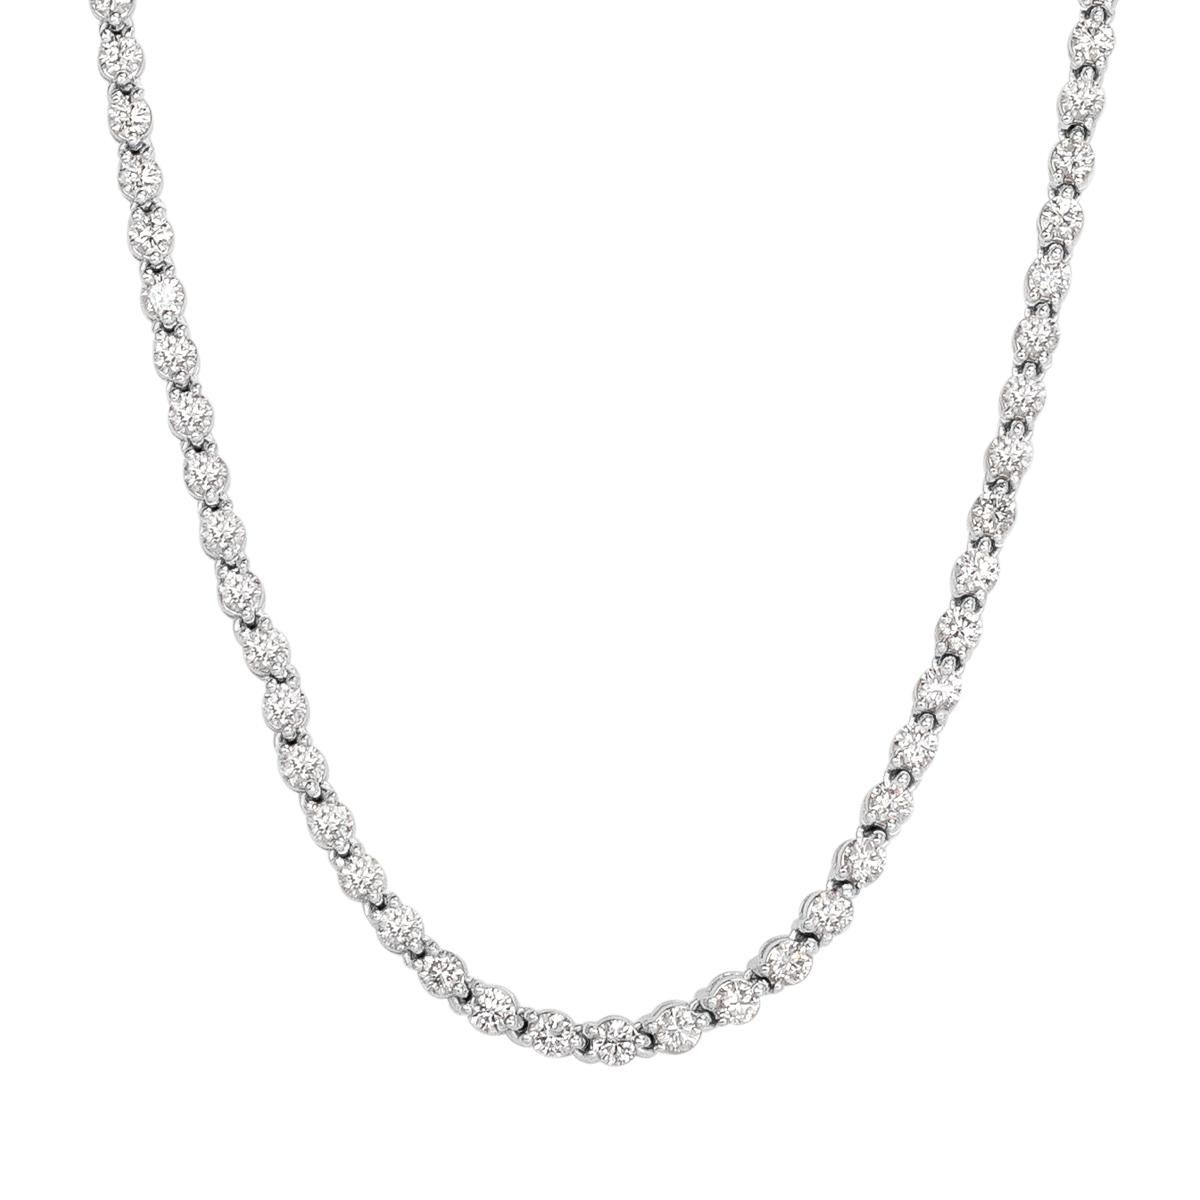 This superb diamond tennis necklace showcases 7.58ct of round brilliant cut diamonds graded at top qualities of F-G in color, SI1-SI2 in clarity. They are matched to perfection and set in a classic four-prong, 18k white gold setting.